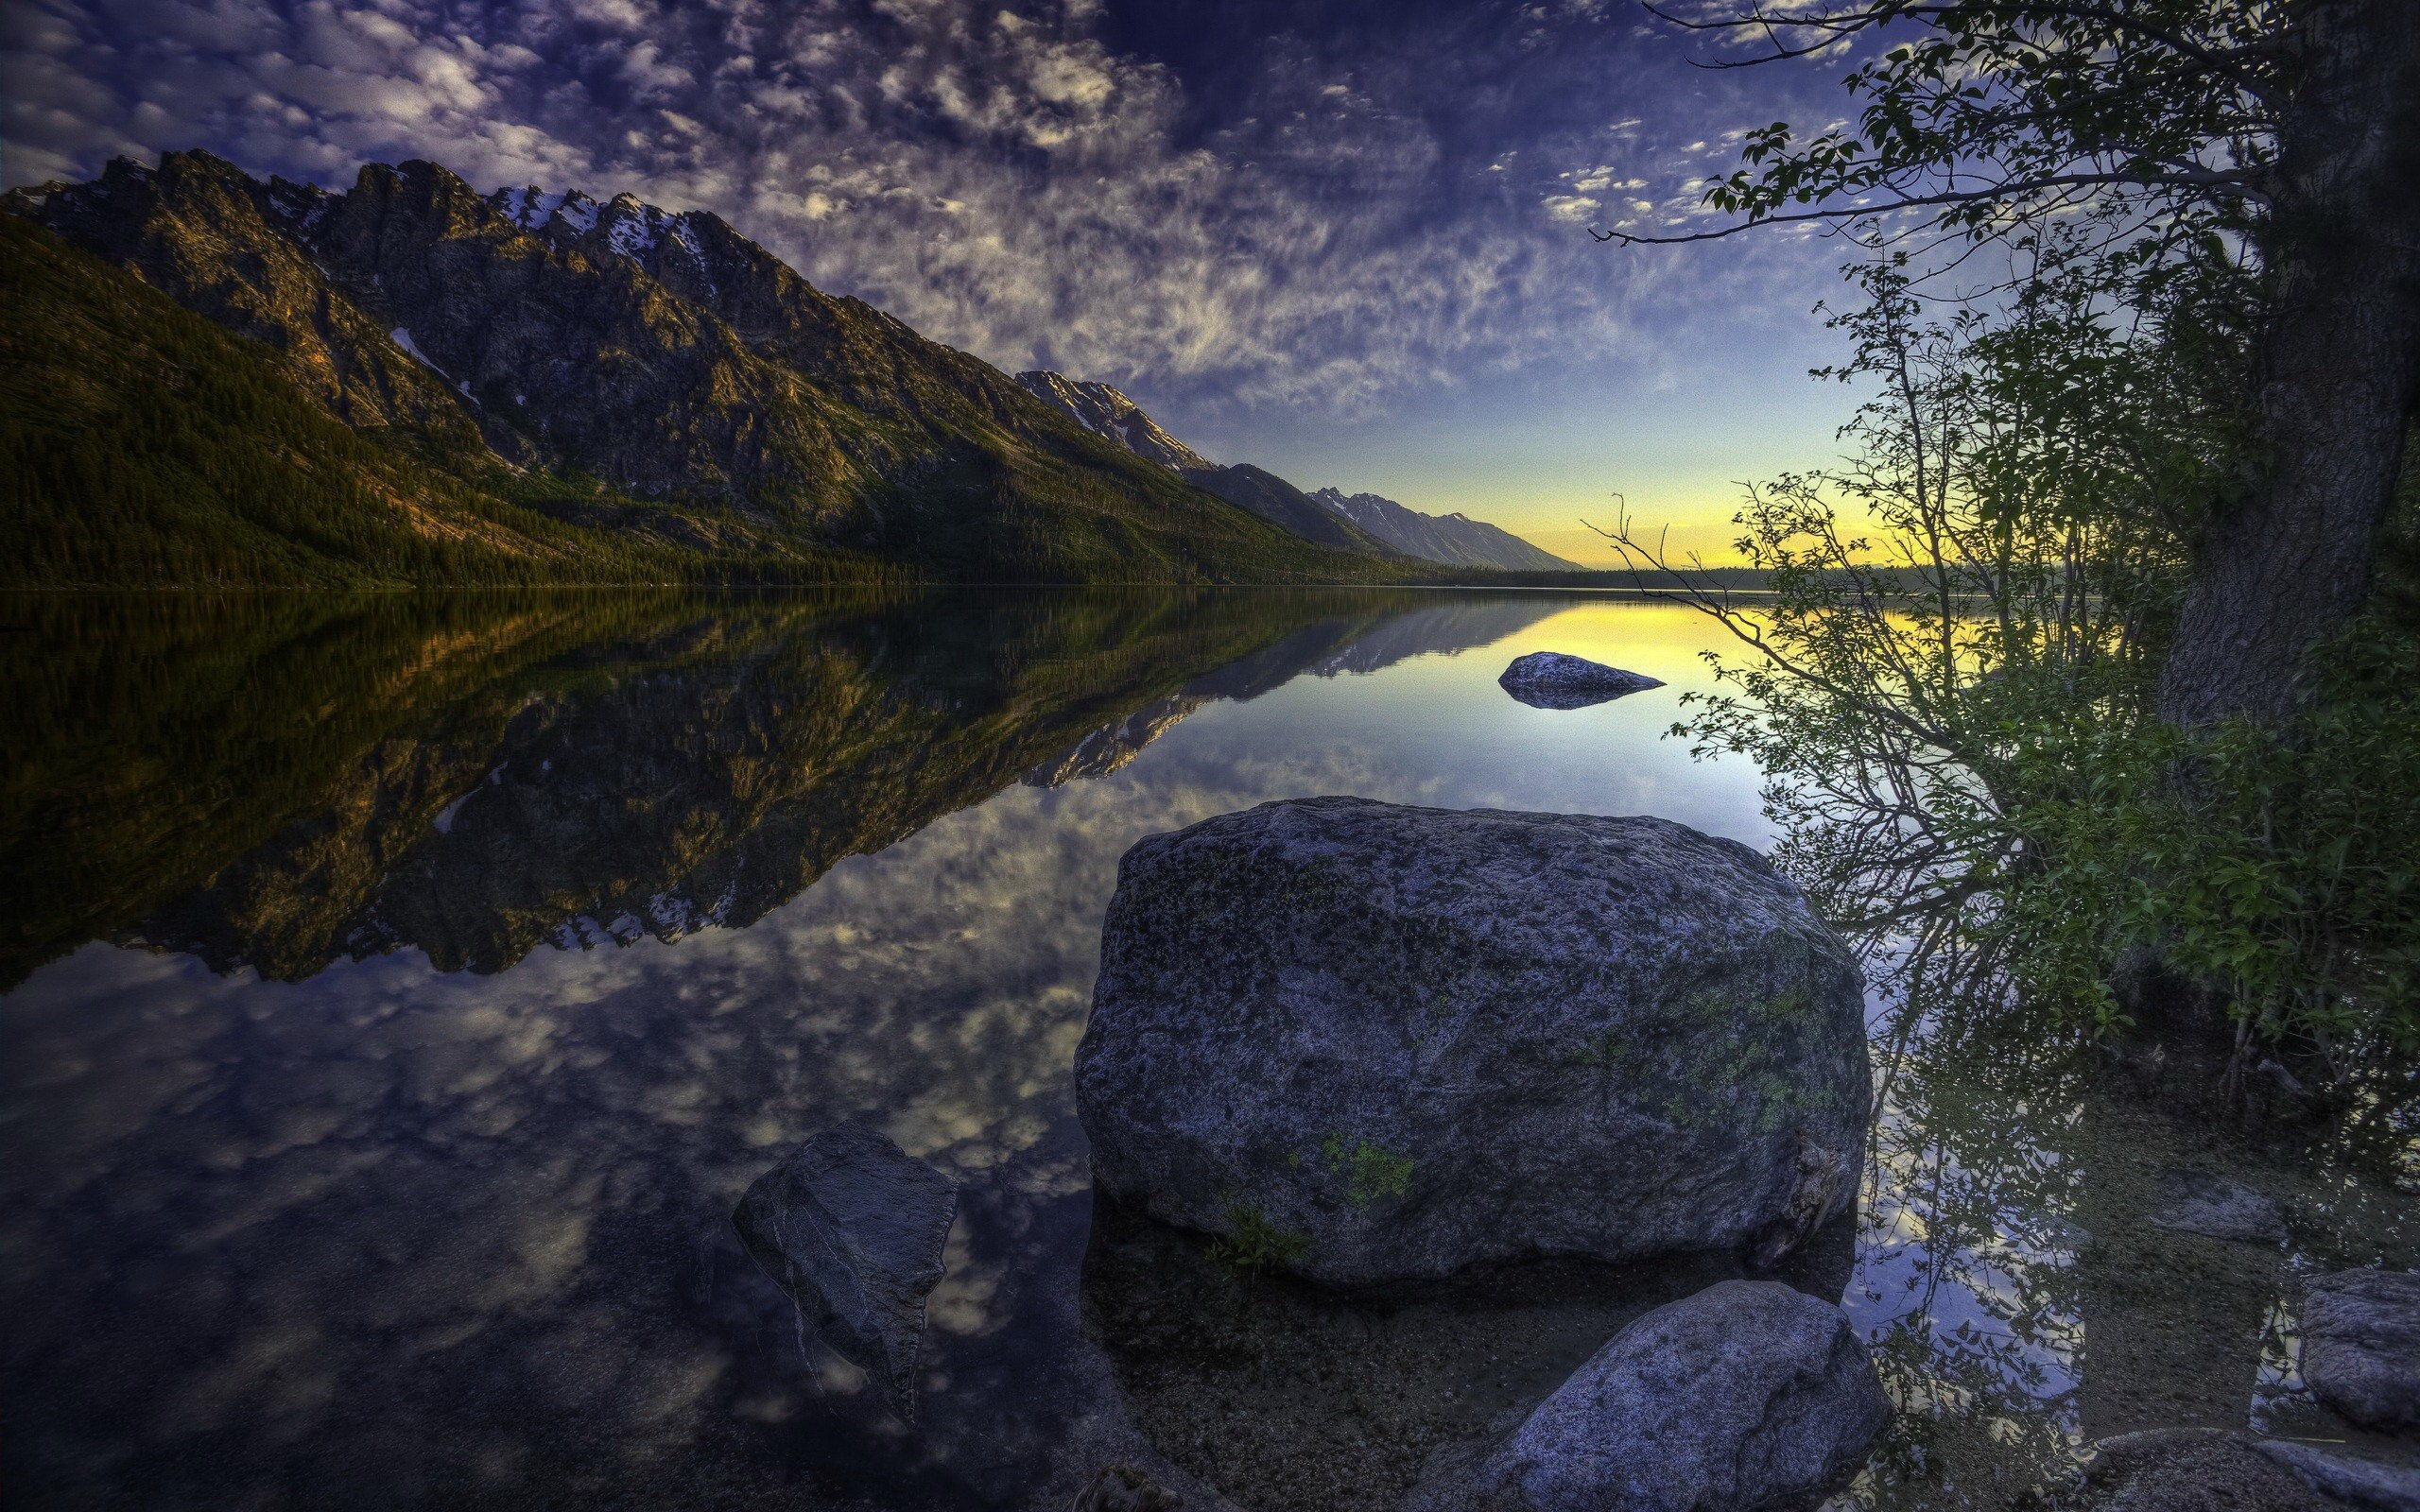 Reflection in the water natural scenery wallpaper #13 - 2560x1600